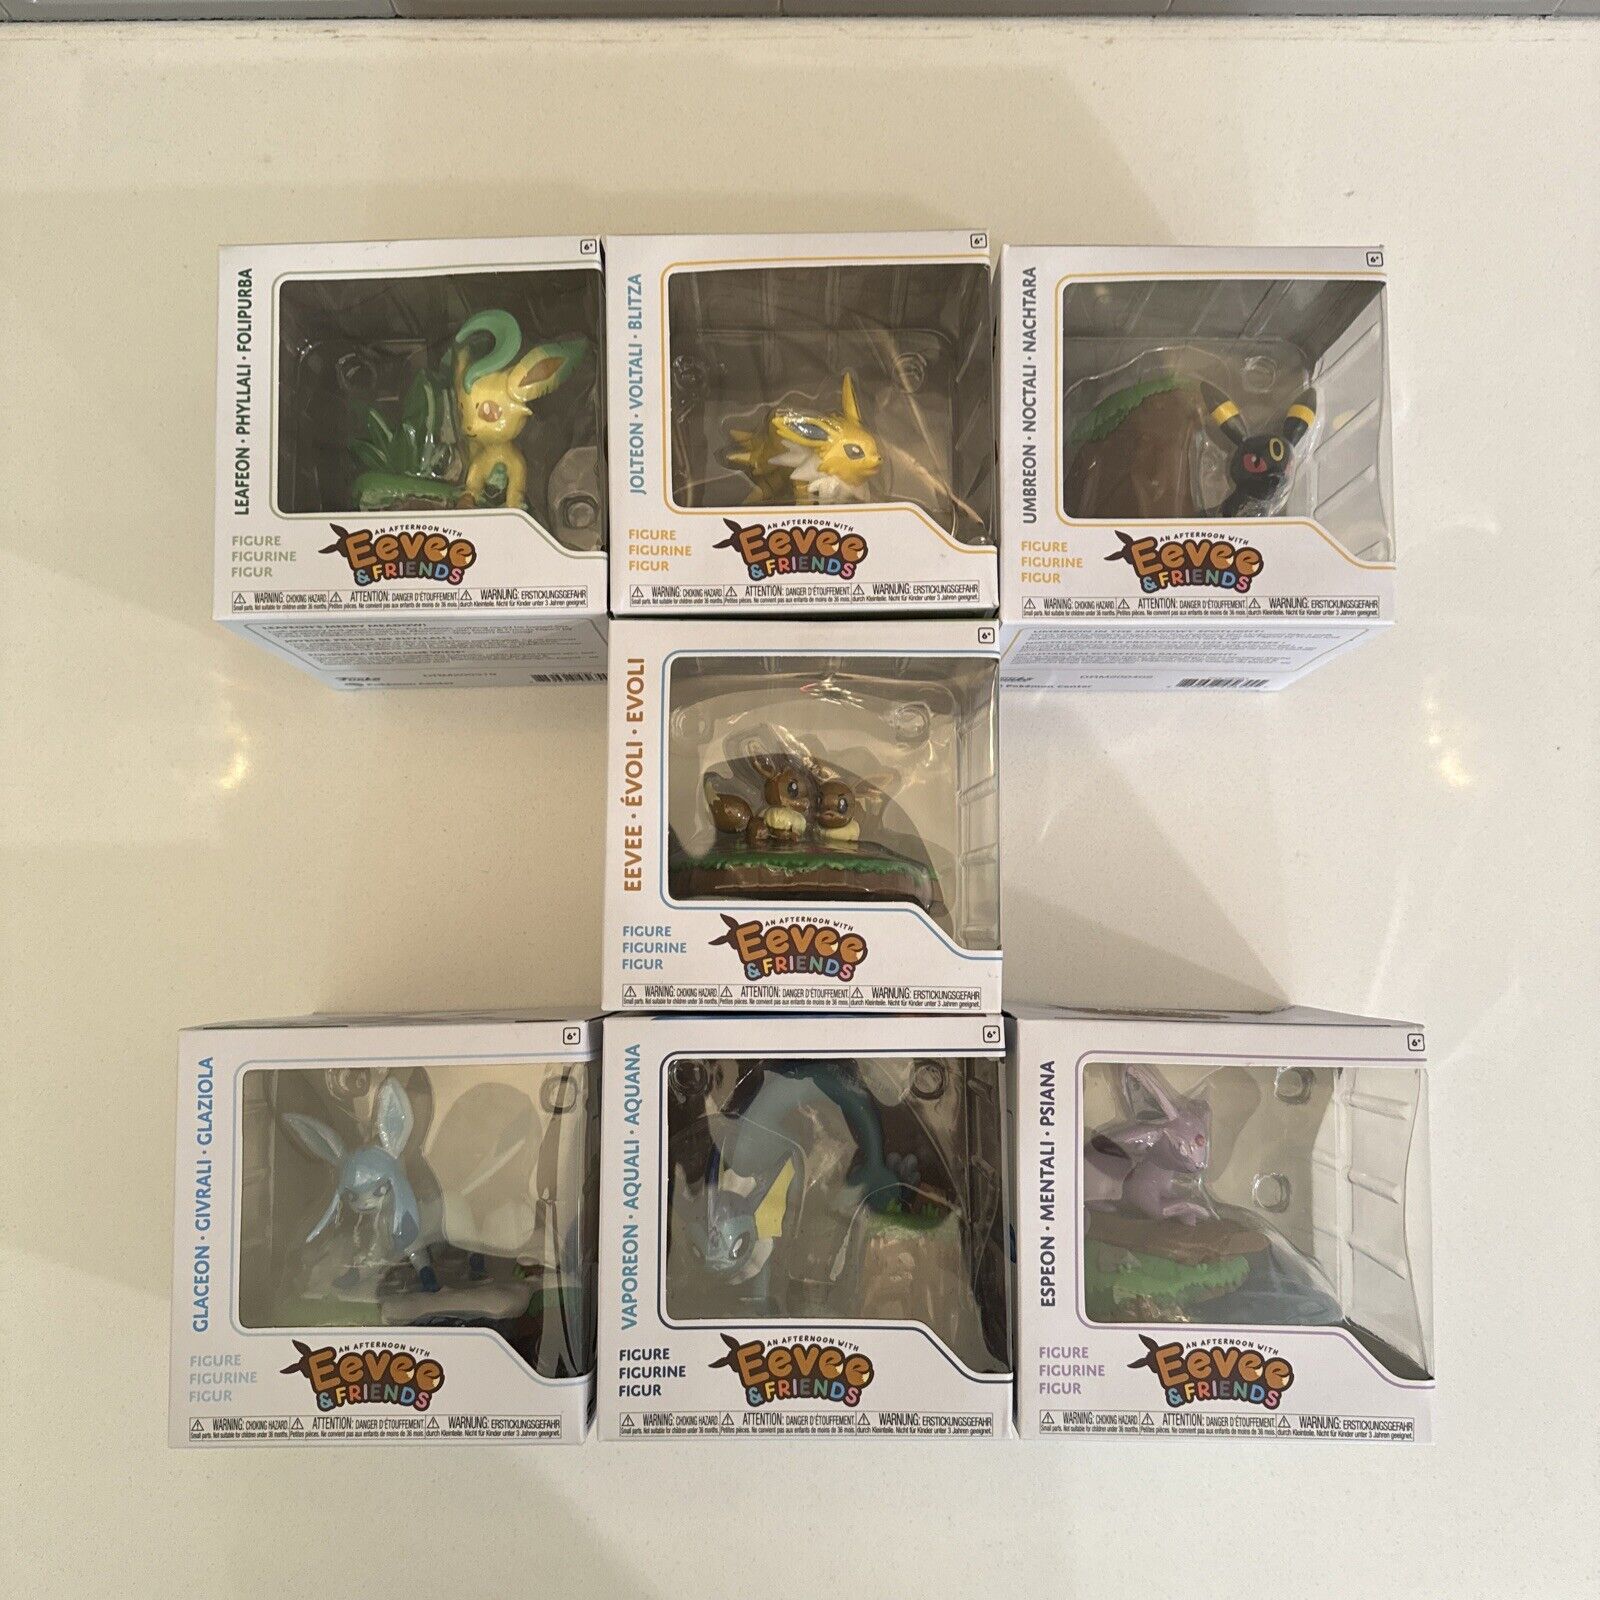 Funko Pokemon “An Afternoon with Eevee and Friends” Set of 7 Figures